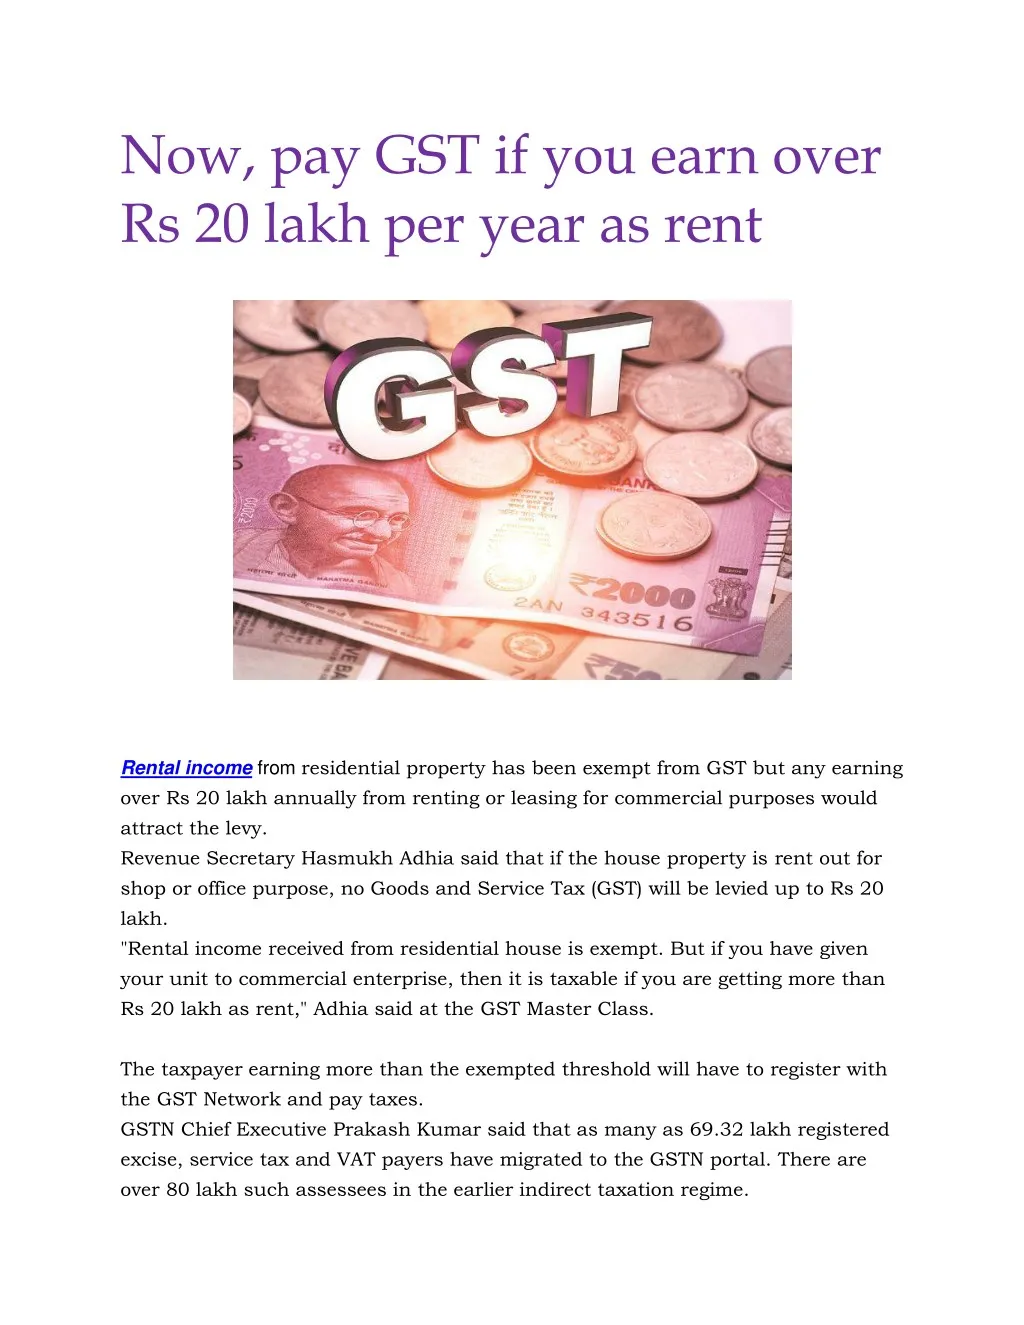 now pay gst if you earn over rs 20 lakh per year